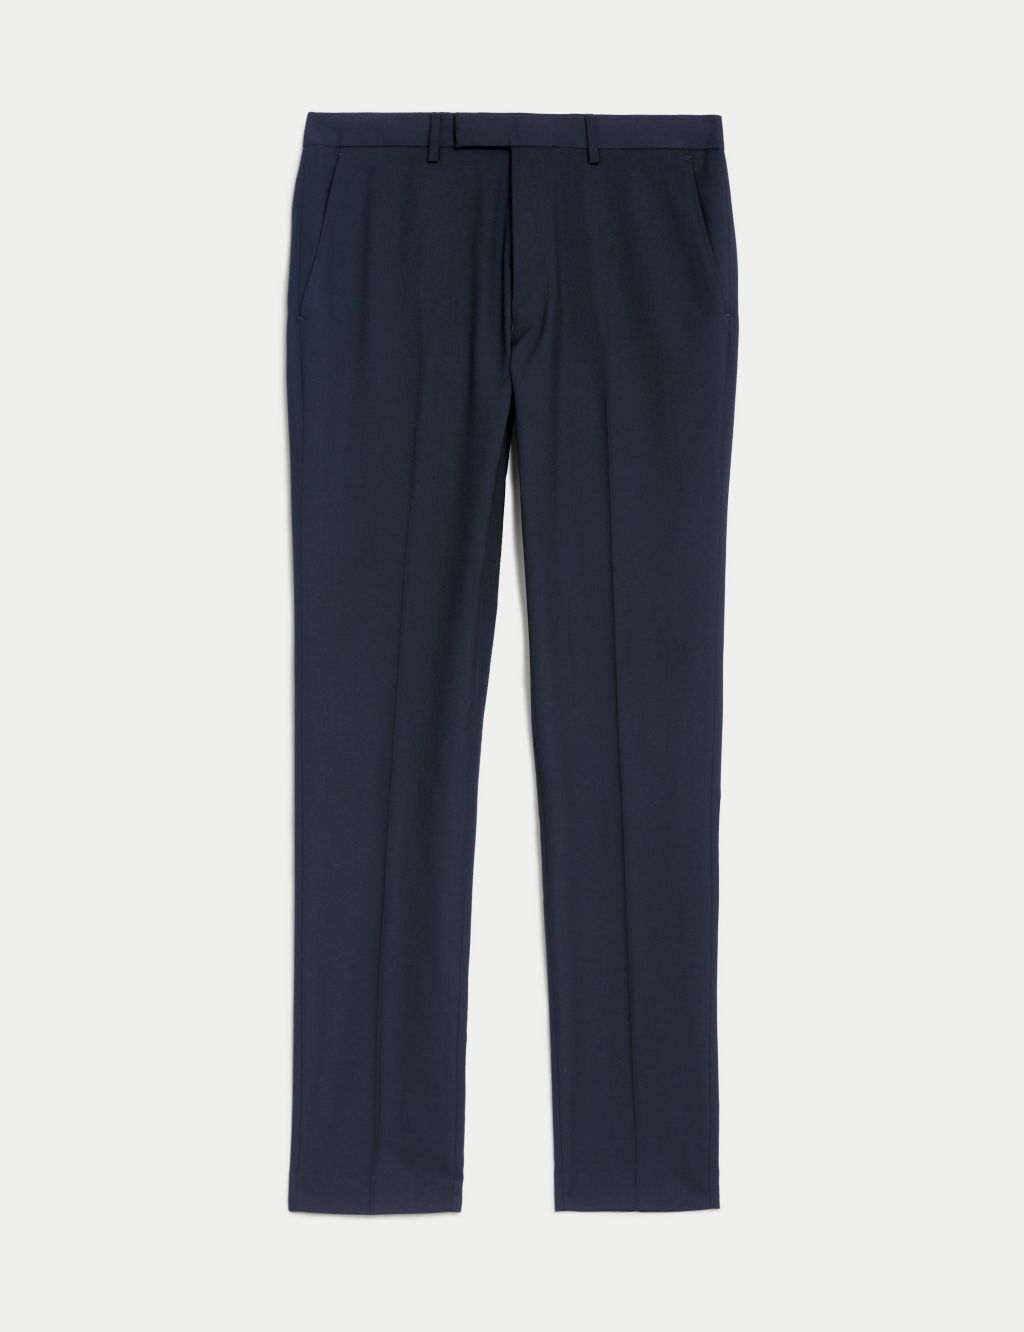 Skinny Fit Stretch Suit Trousers image 2